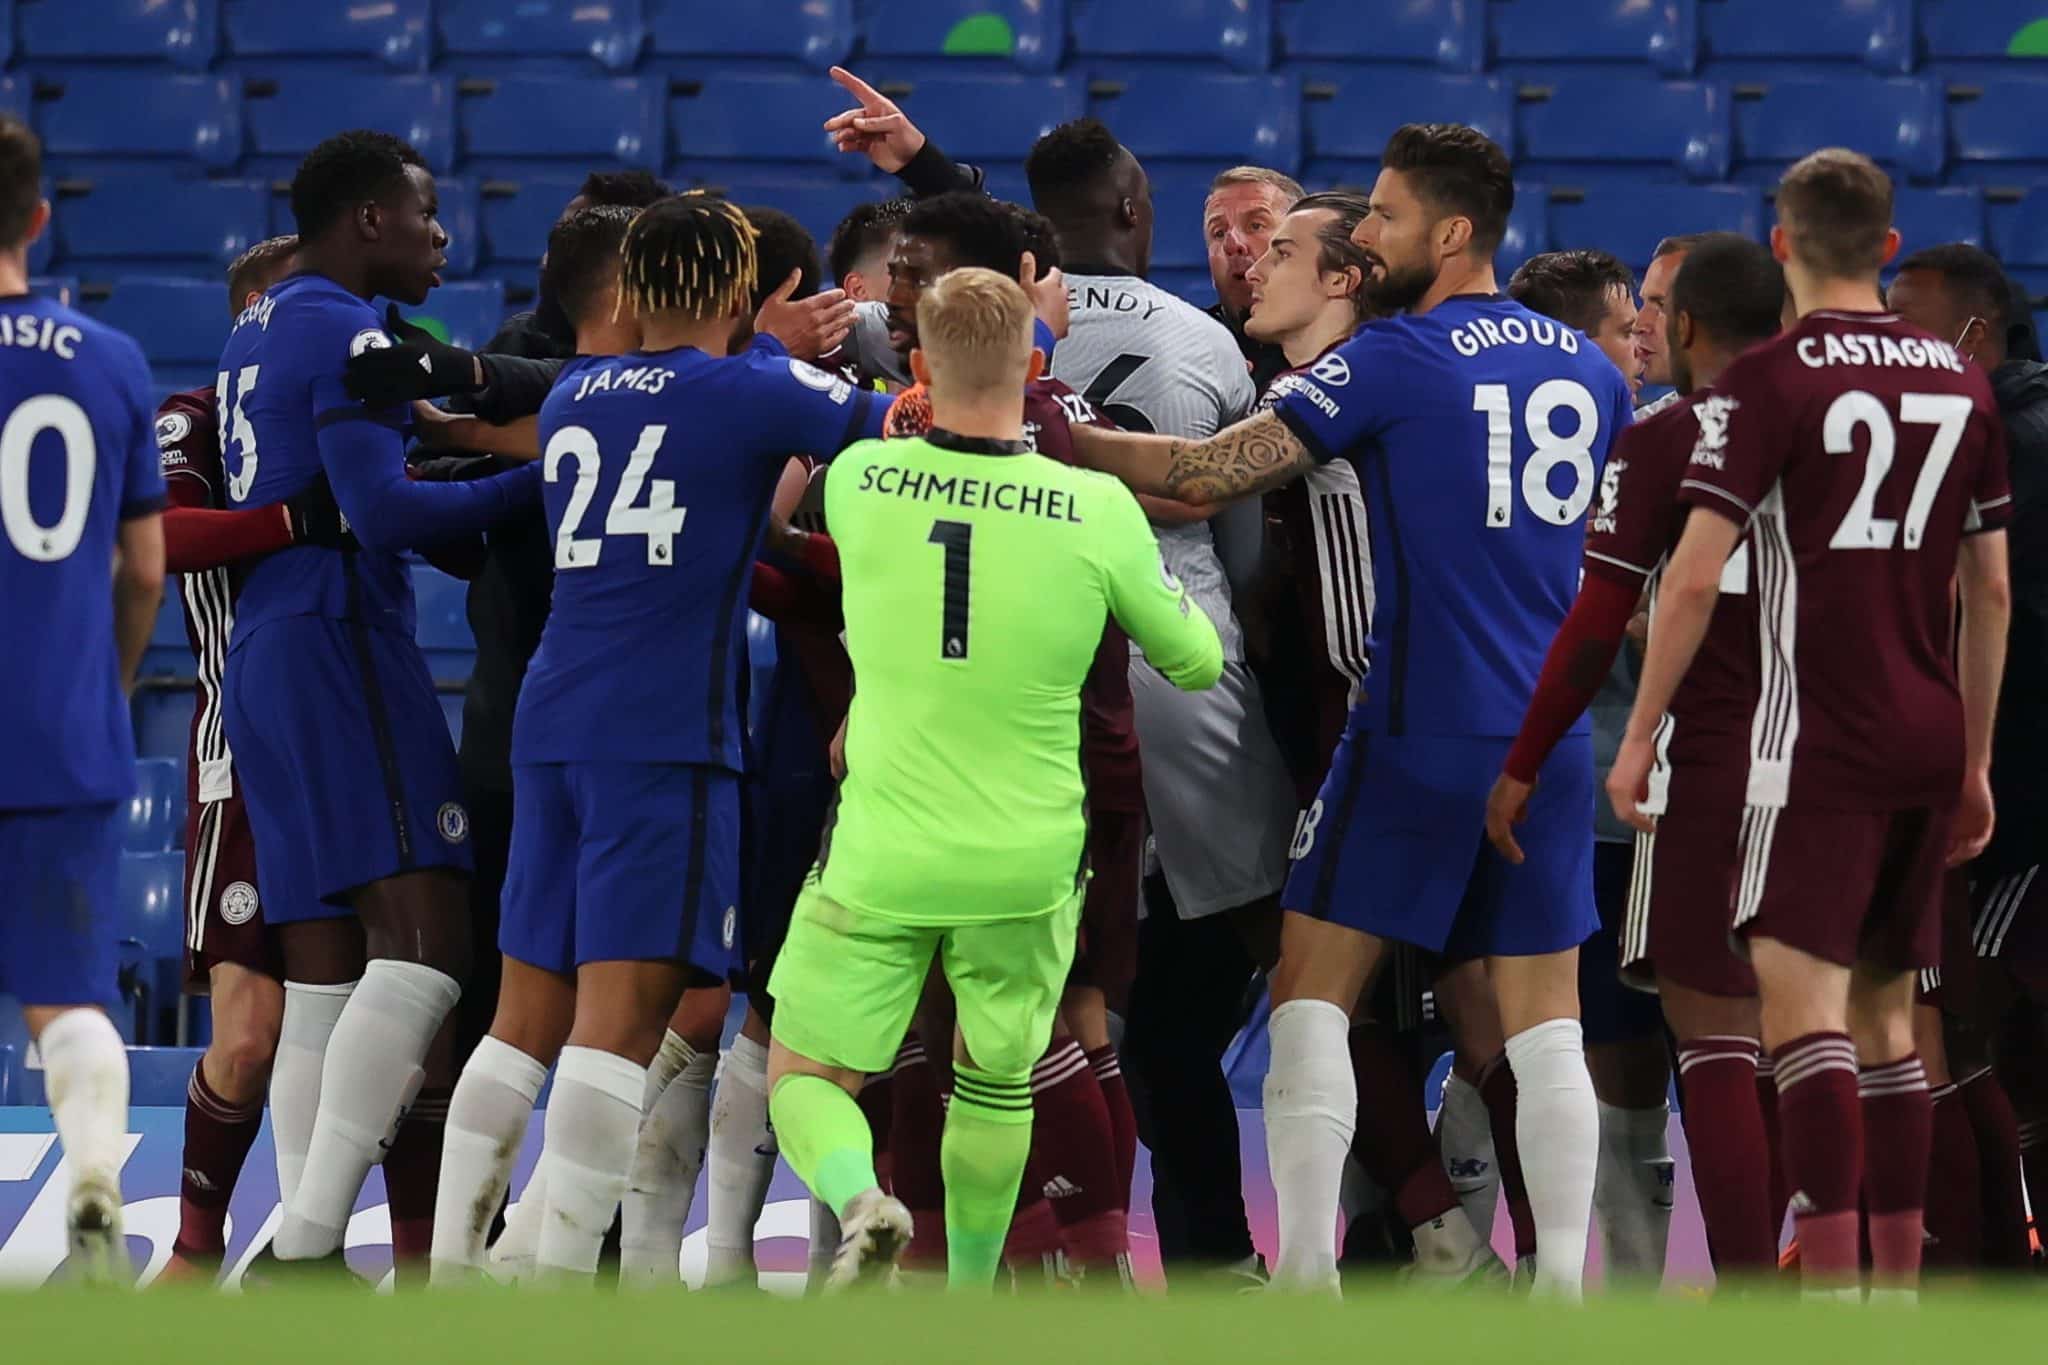 Chelsea and Leicester FINED £22,500 by the FA